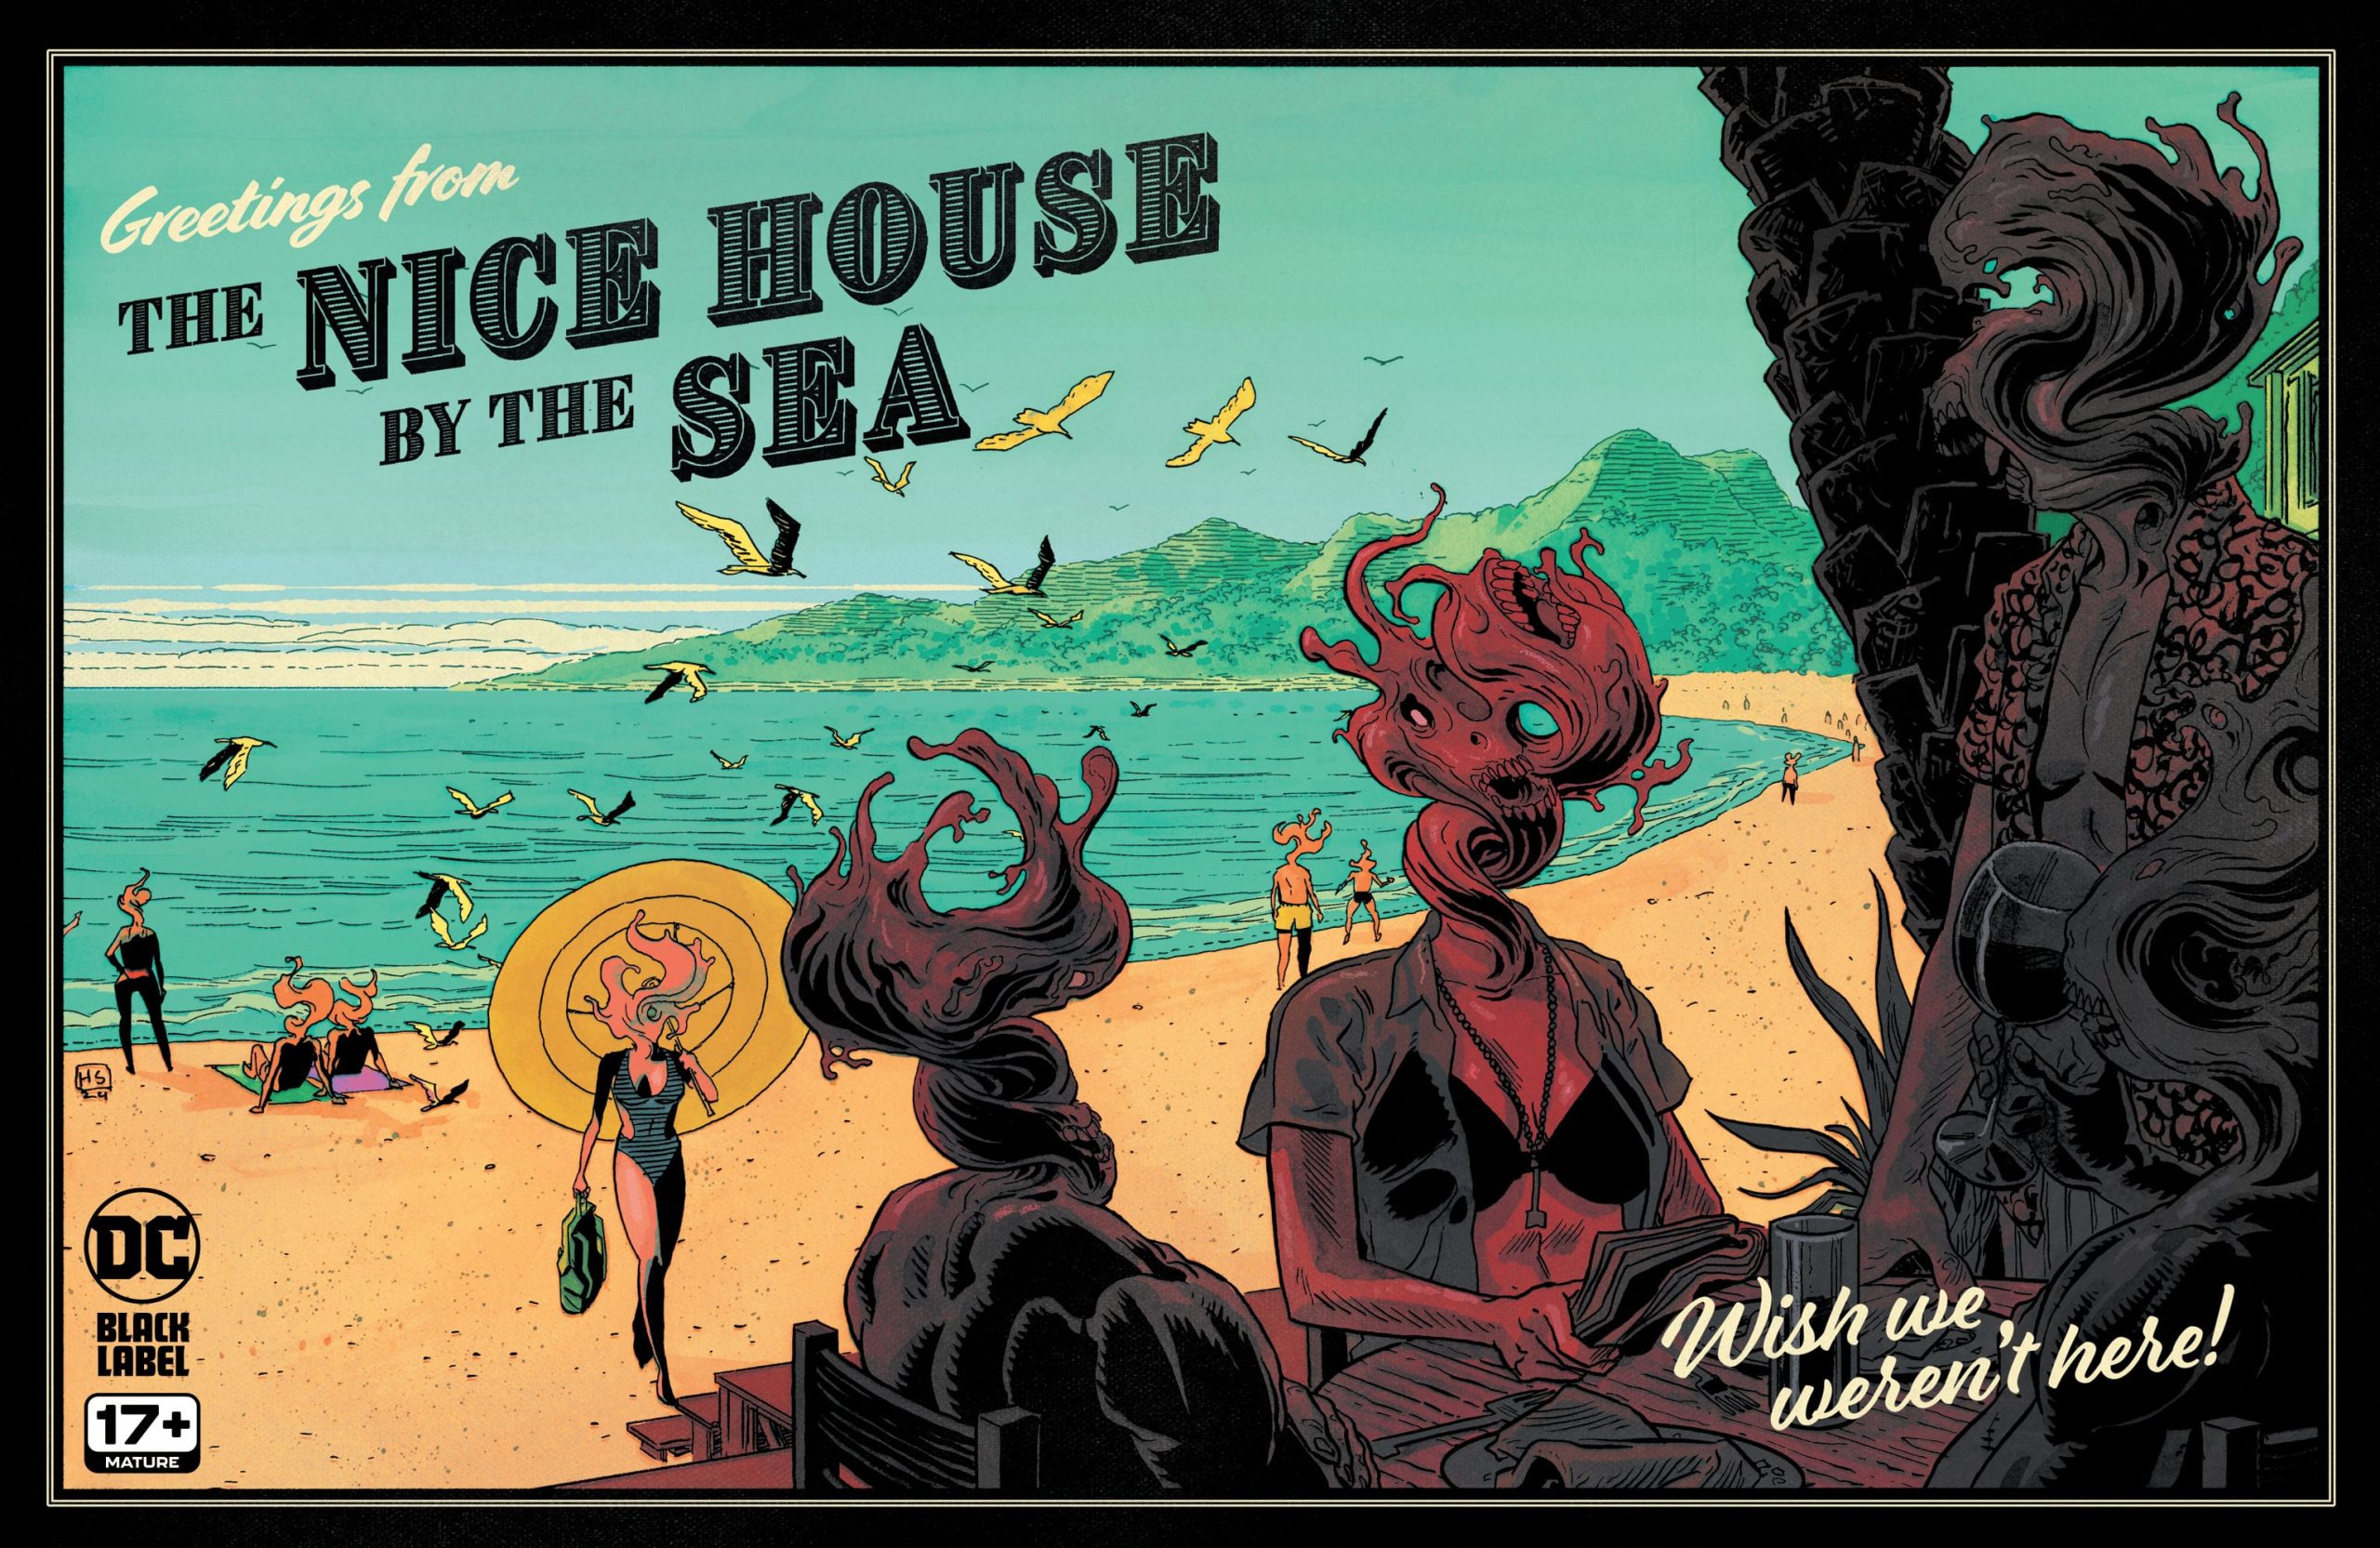 See character designs and a preview of 'The Nice House by the Sea' #1